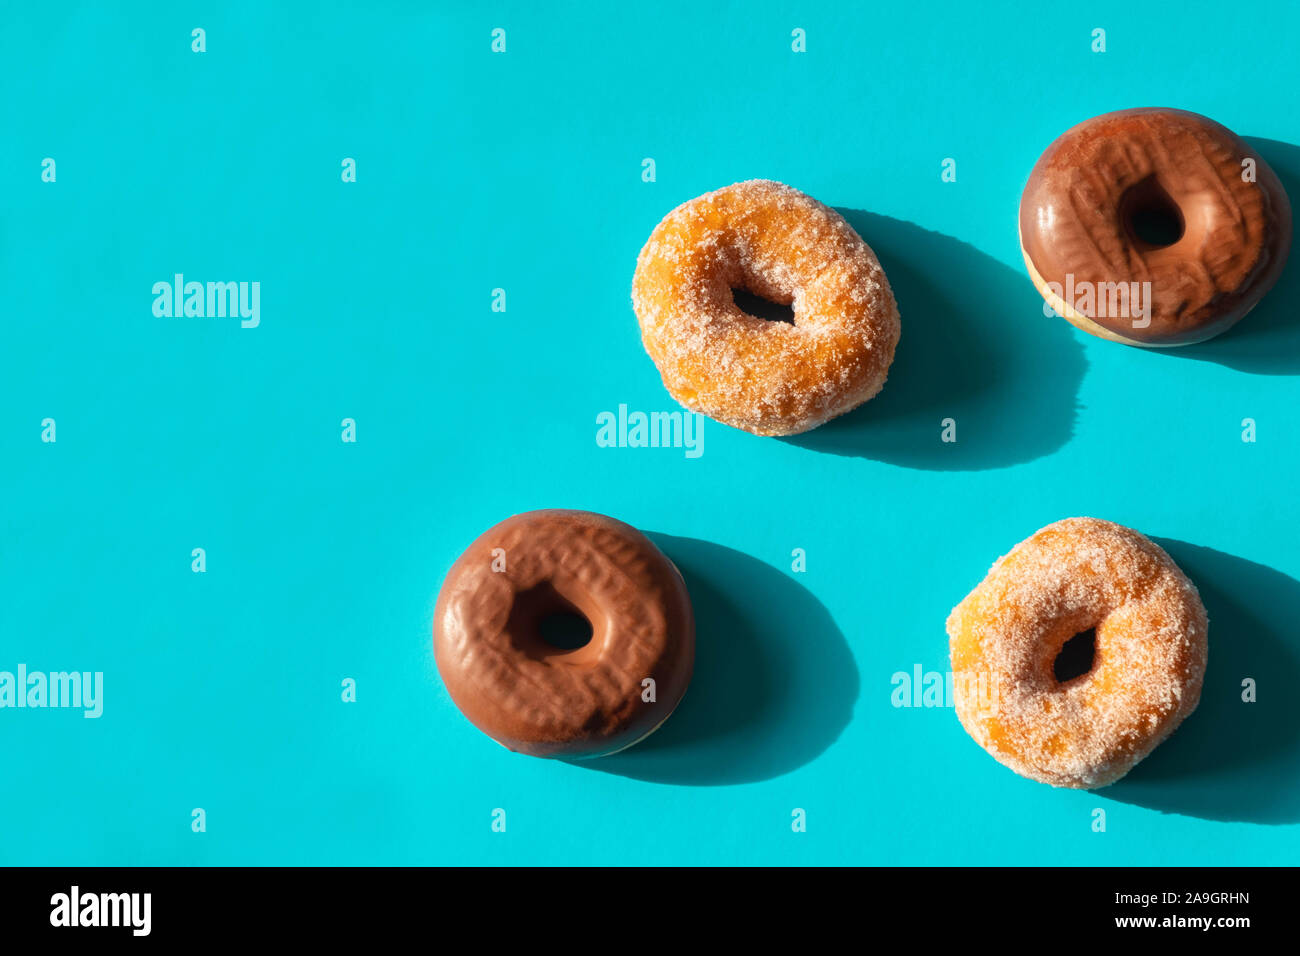 Chocolate frosted donuts and sugar coated donuts on bright blue paper background Stock Photo